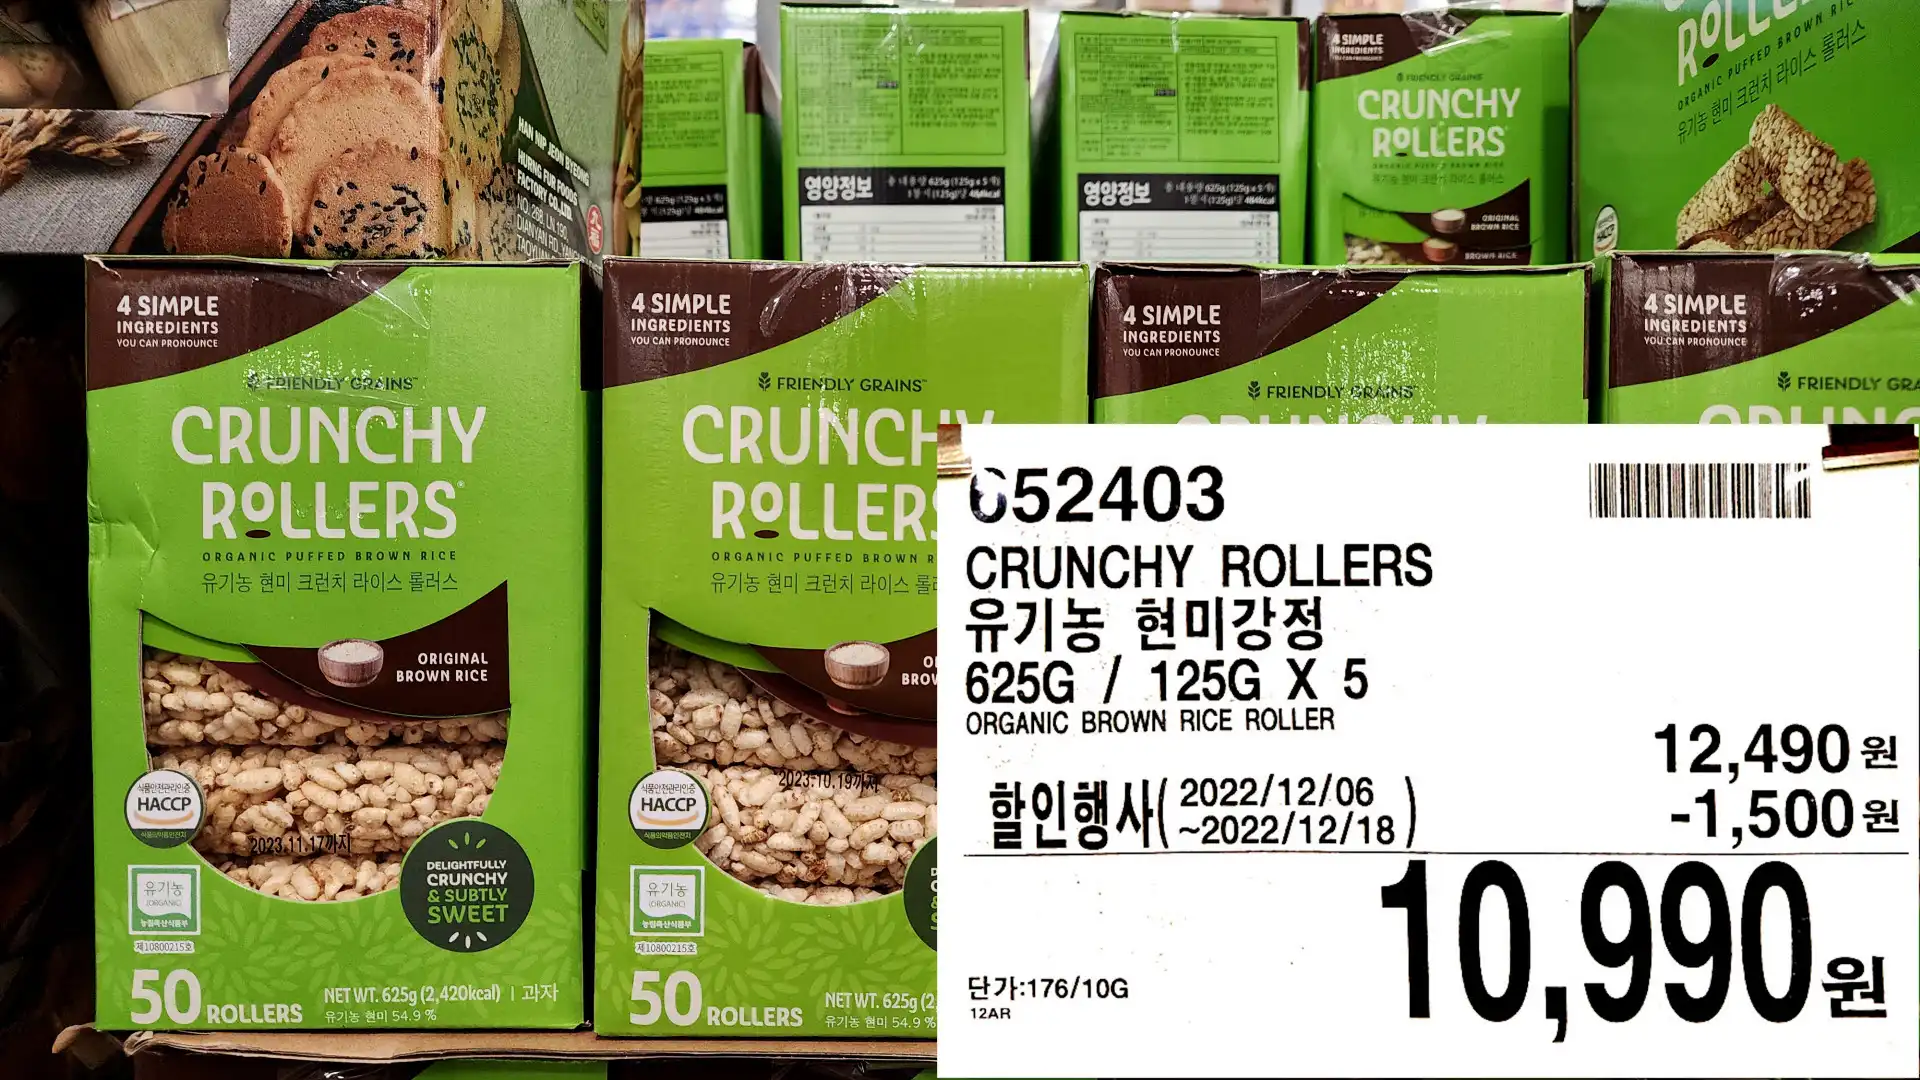 CRUNCHY ROLLERS
유기농 현미강정
625G 125G X 5
ORGANIC BROWN RICE ROLLER
10&#44;990원